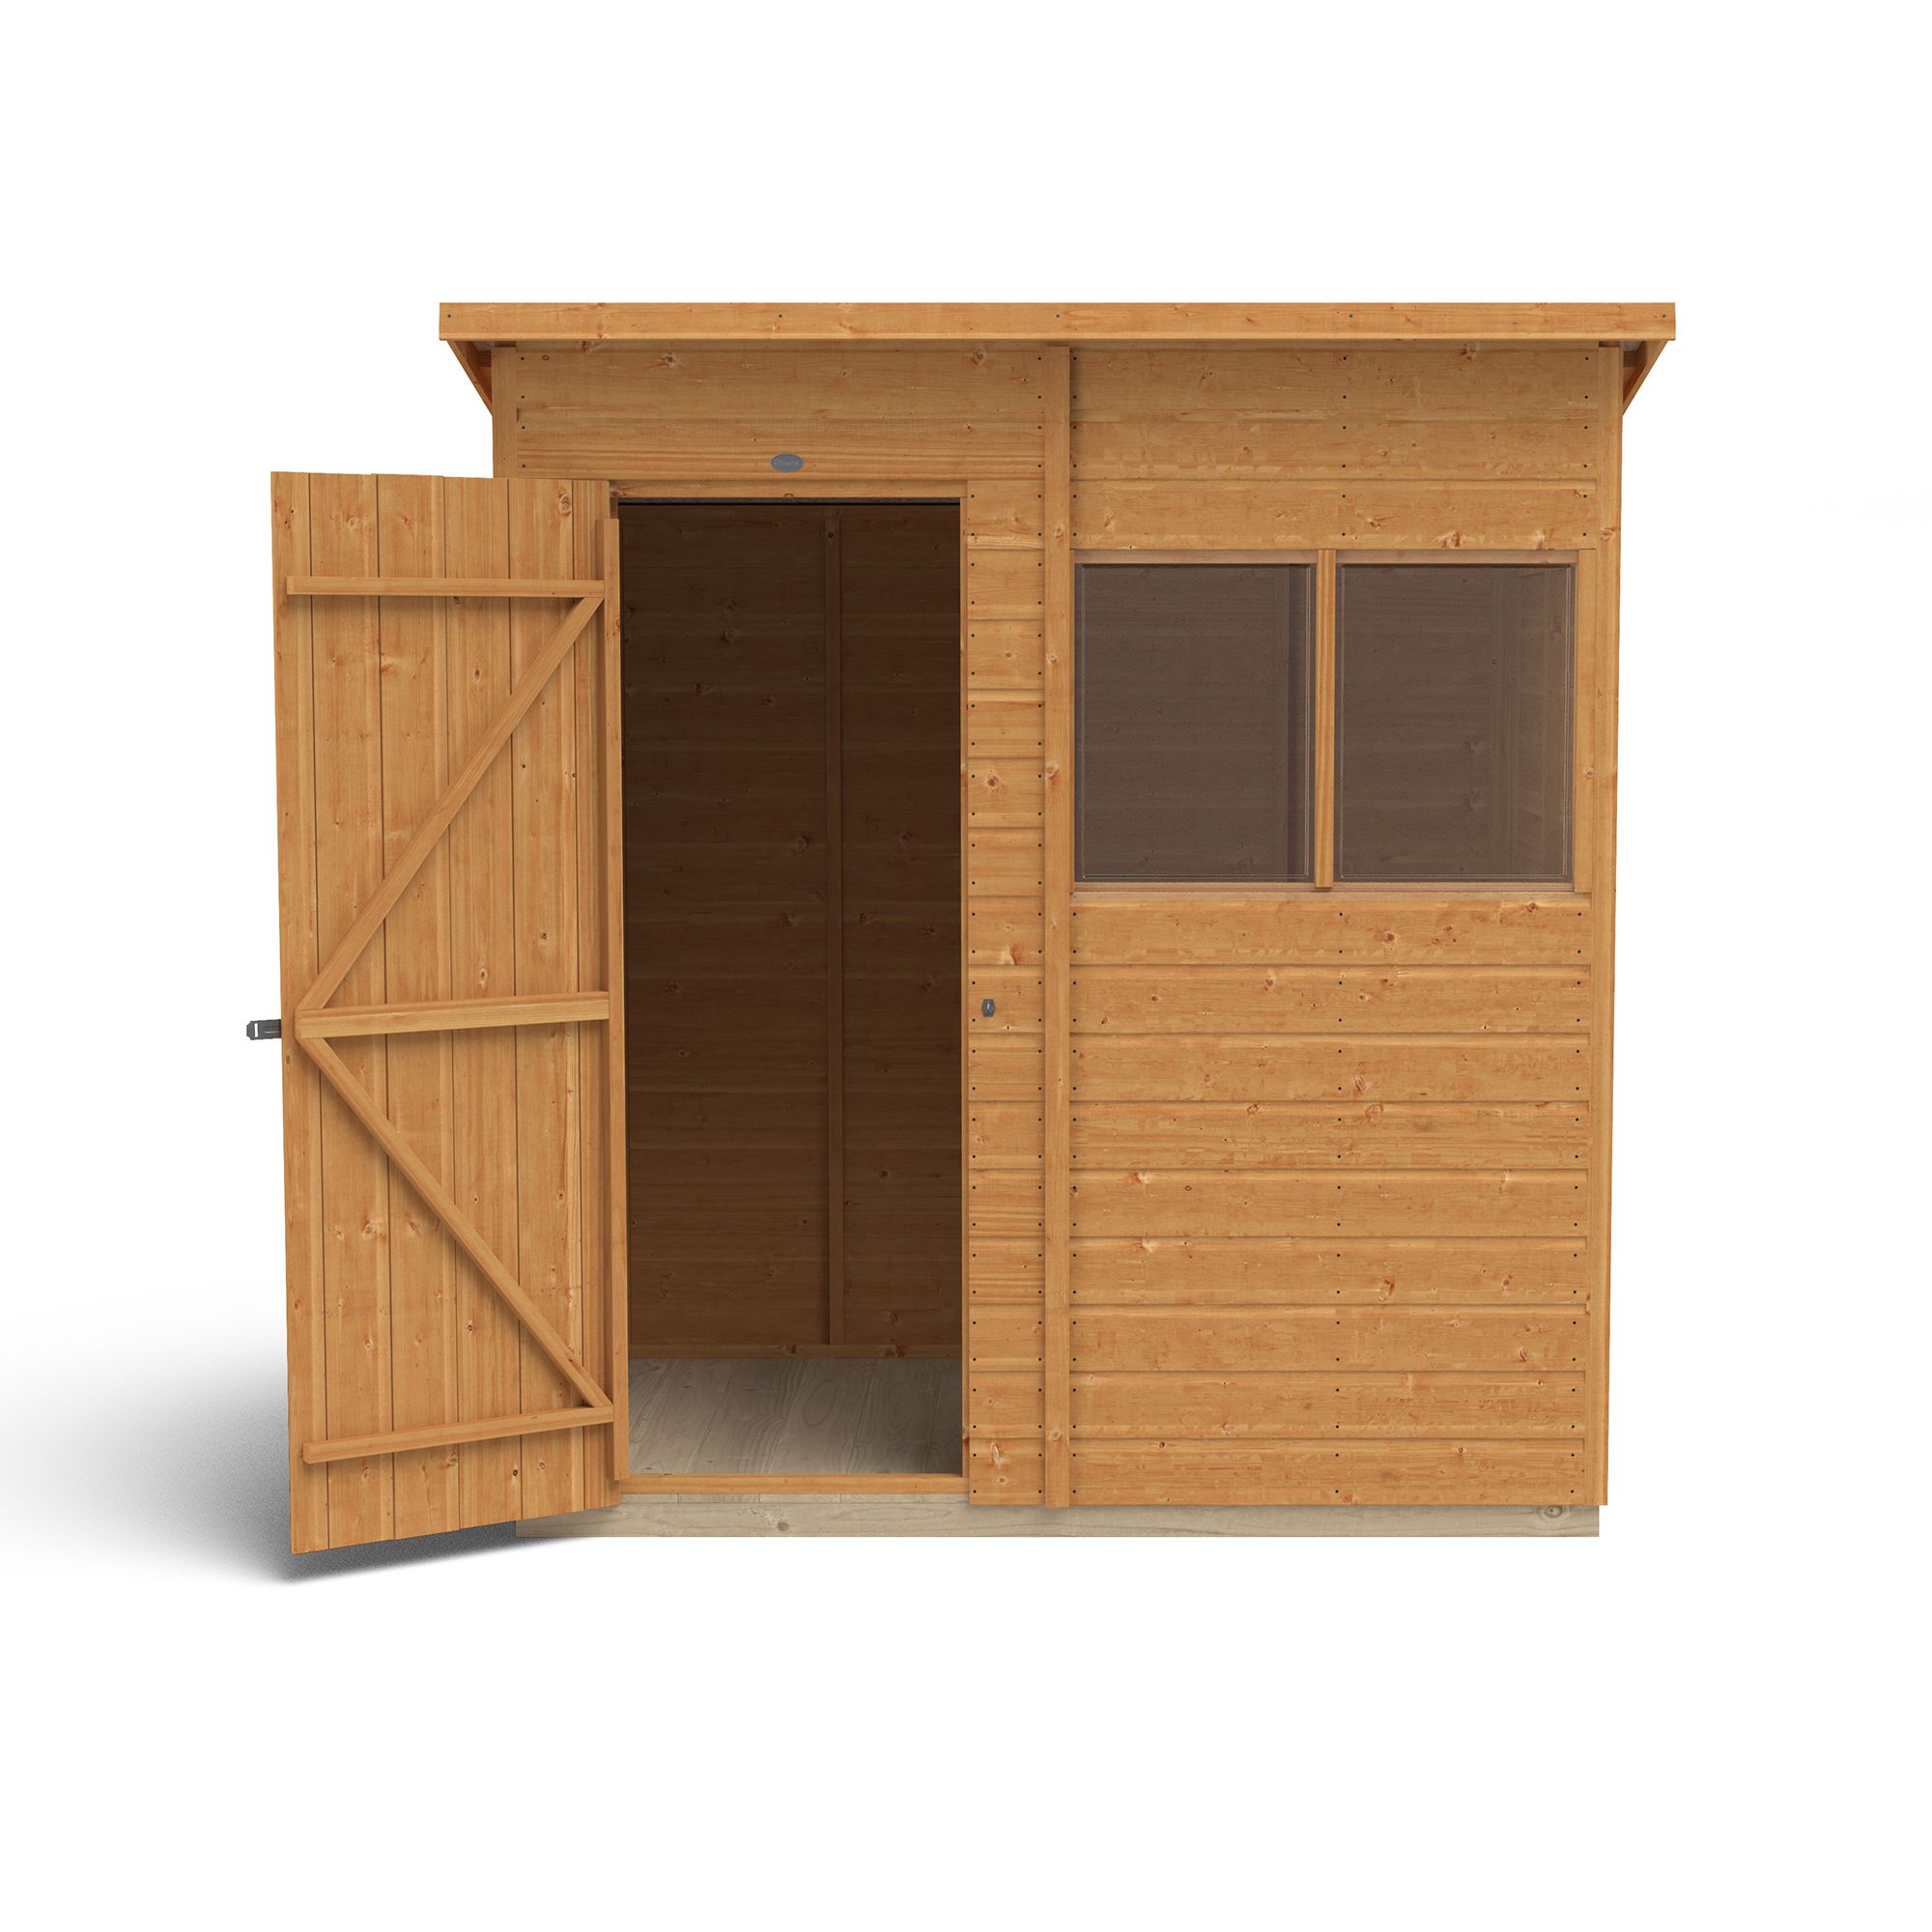 Forest Garden Shiplap 6x4 ft Pent Wooden Shed with floor & 2 windows (Base included)